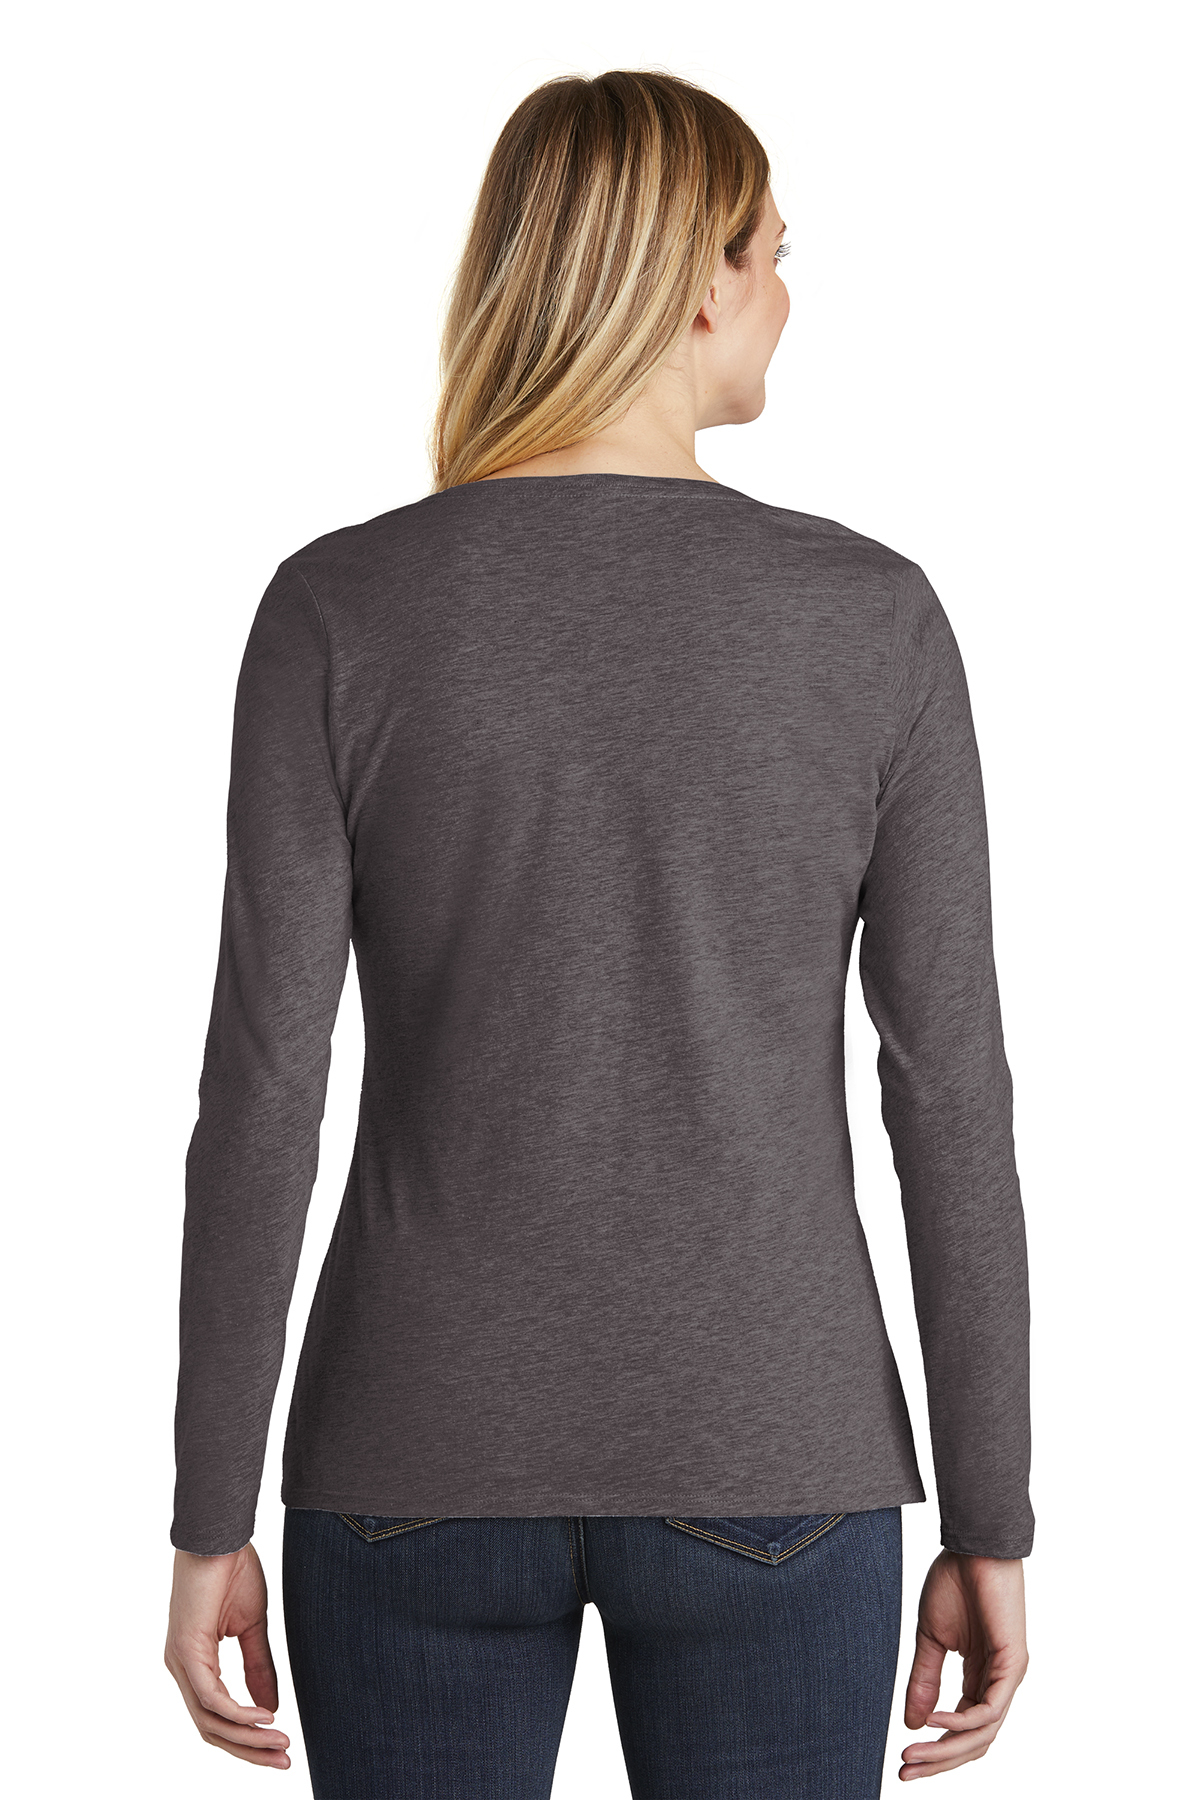 District Women’s Very Important Tee Long Sleeve V-Neck | Product | District